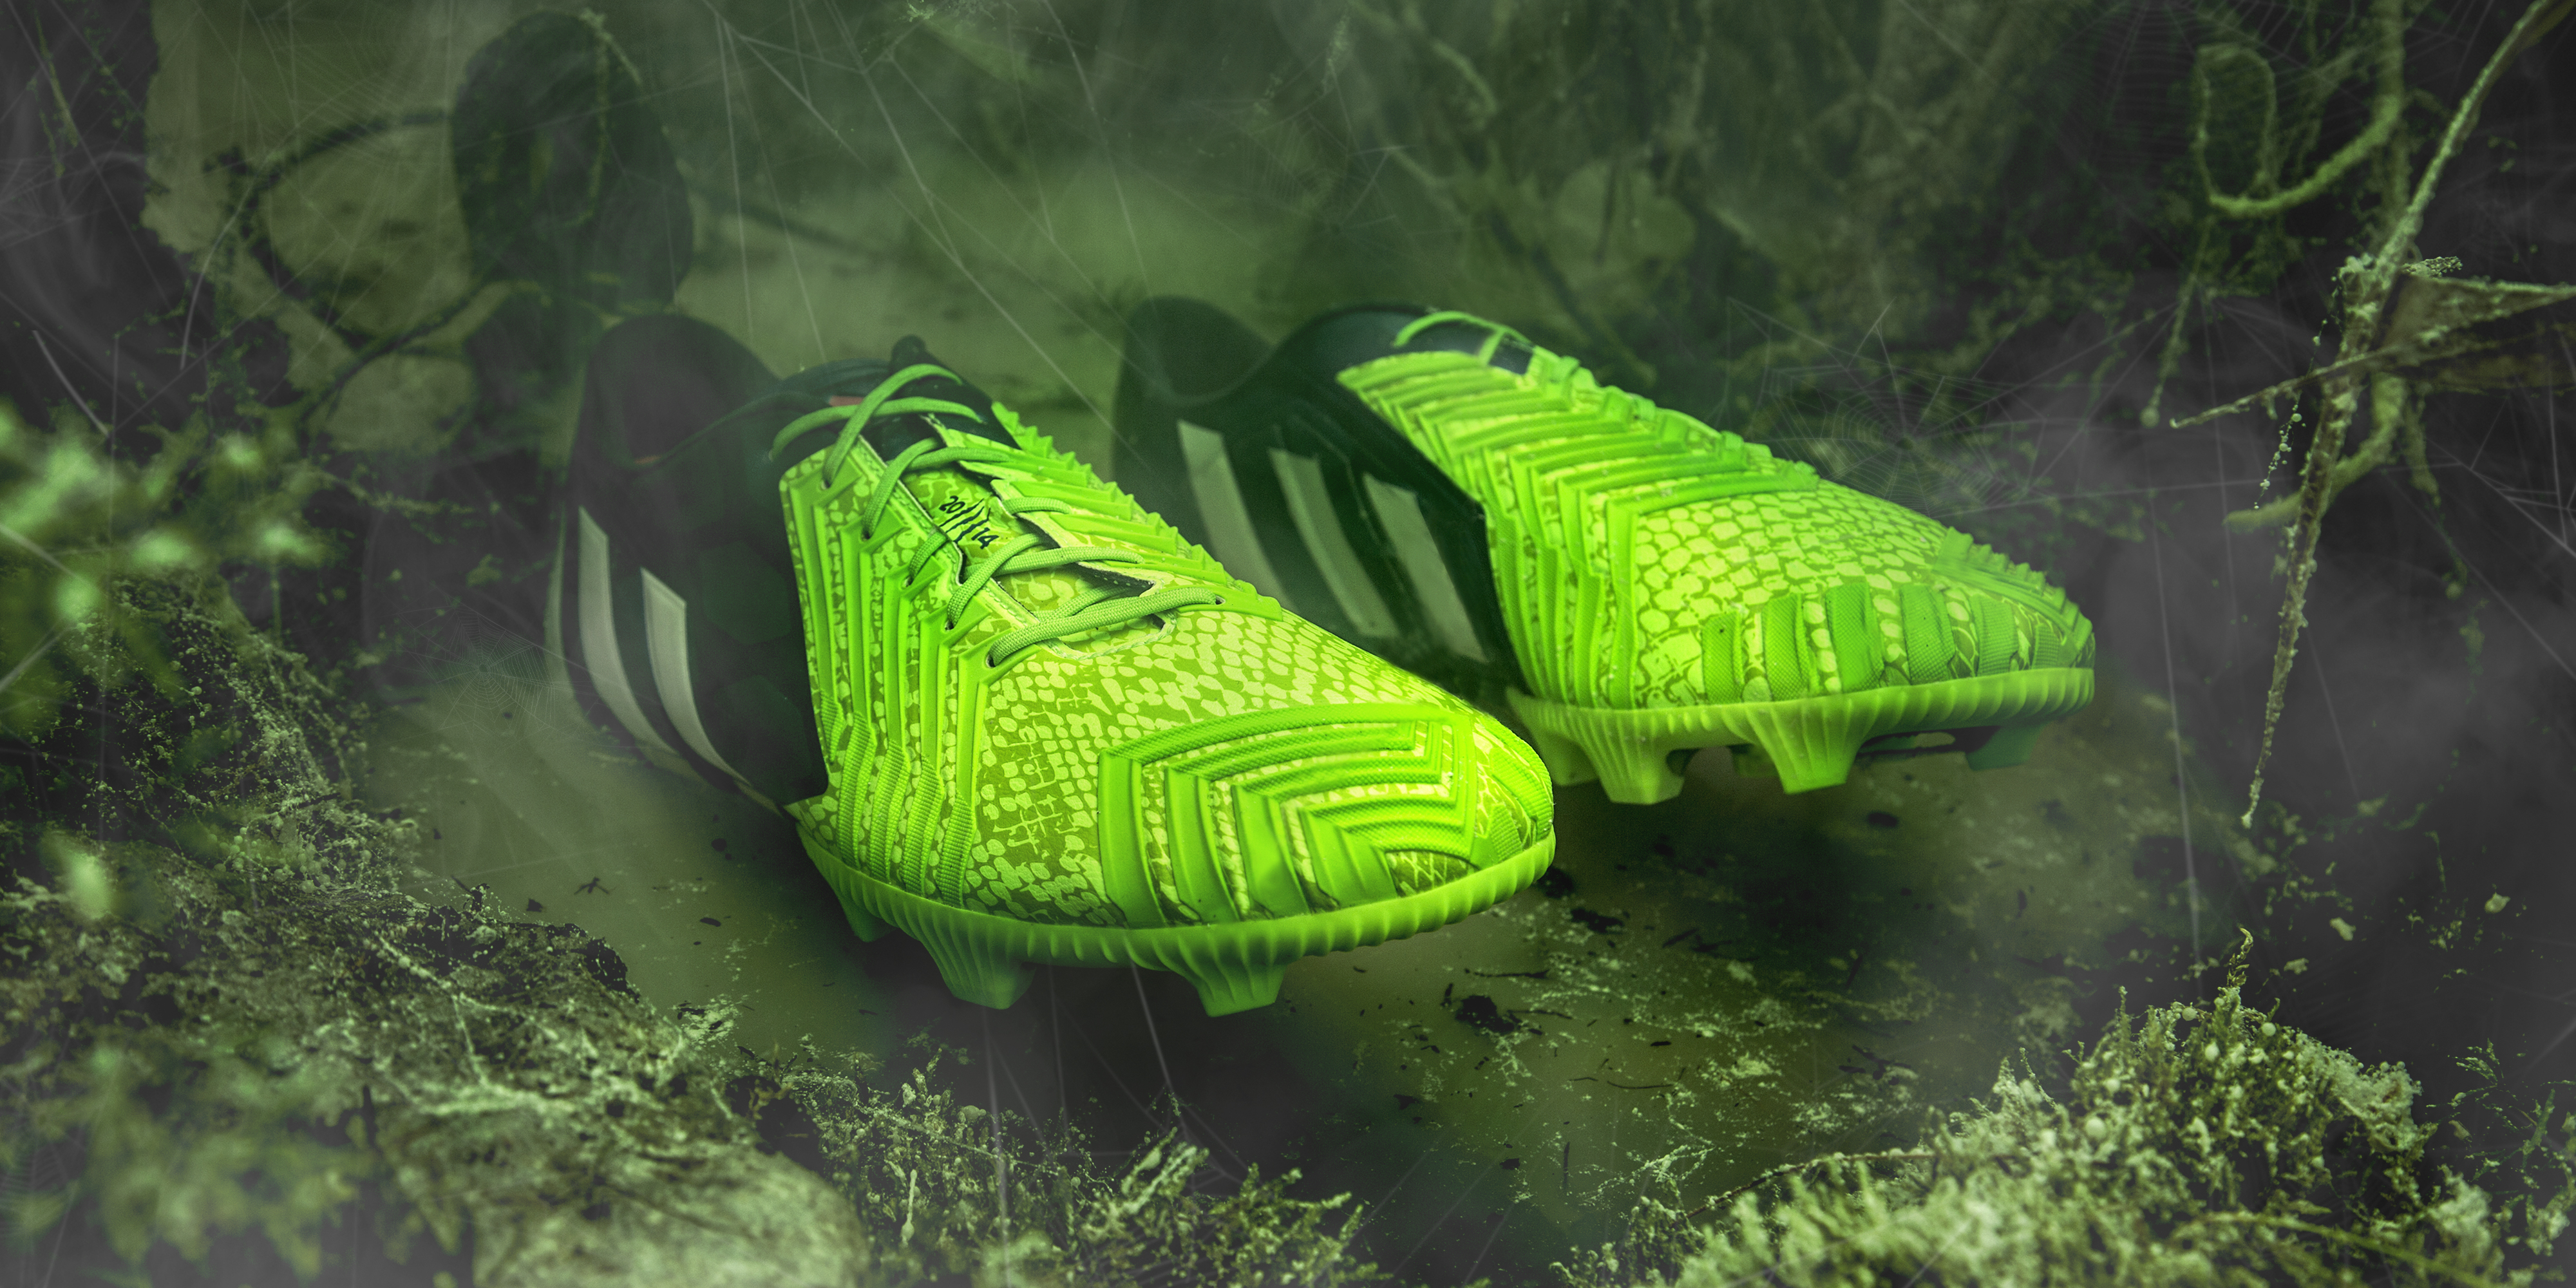 Football boot release: adidas launch Halloween inspired 'Supernatural' colourway for their Predator Instinct and adizero f50 silos